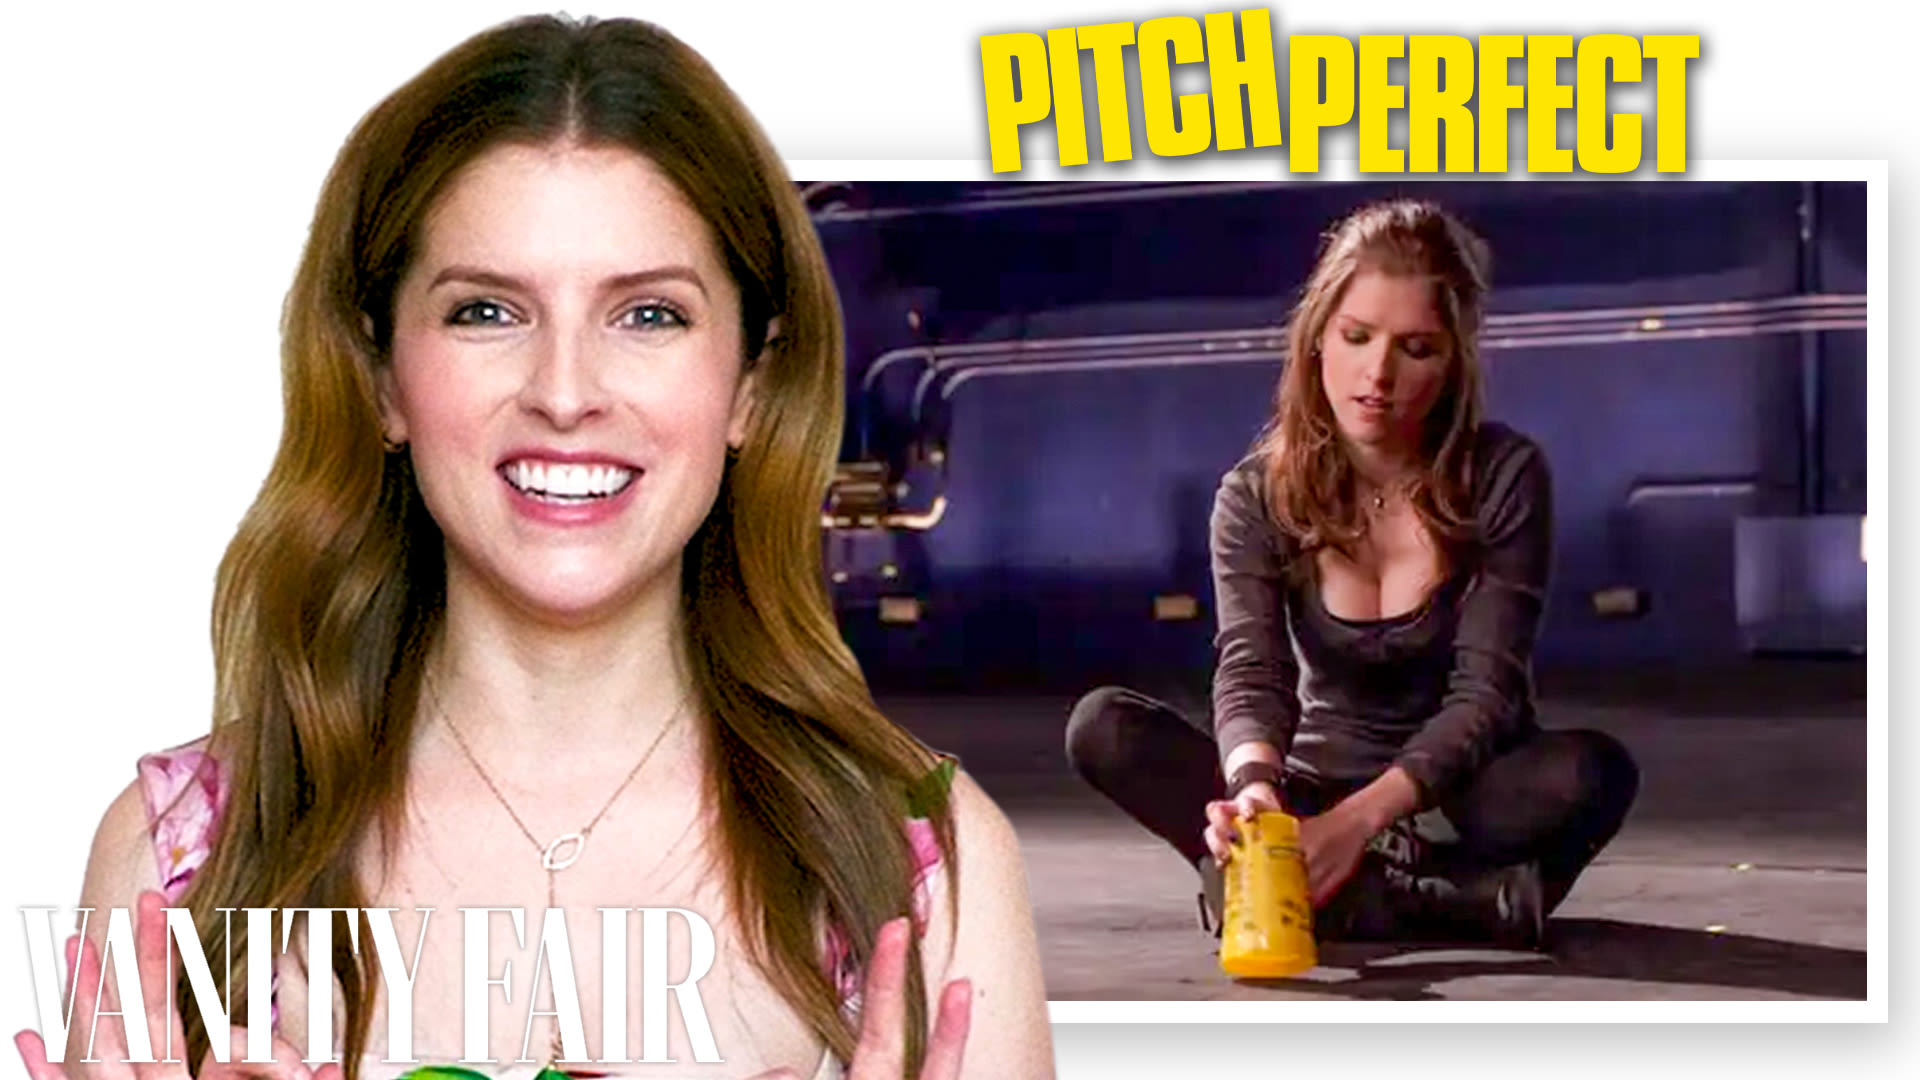 Stefenie Knight Fucking Video - Watch Anna Kendrick Breaks Down Her Career, from 'Pitch Perfect' to  'Twilight' | Career Timeline | Vanity Fair